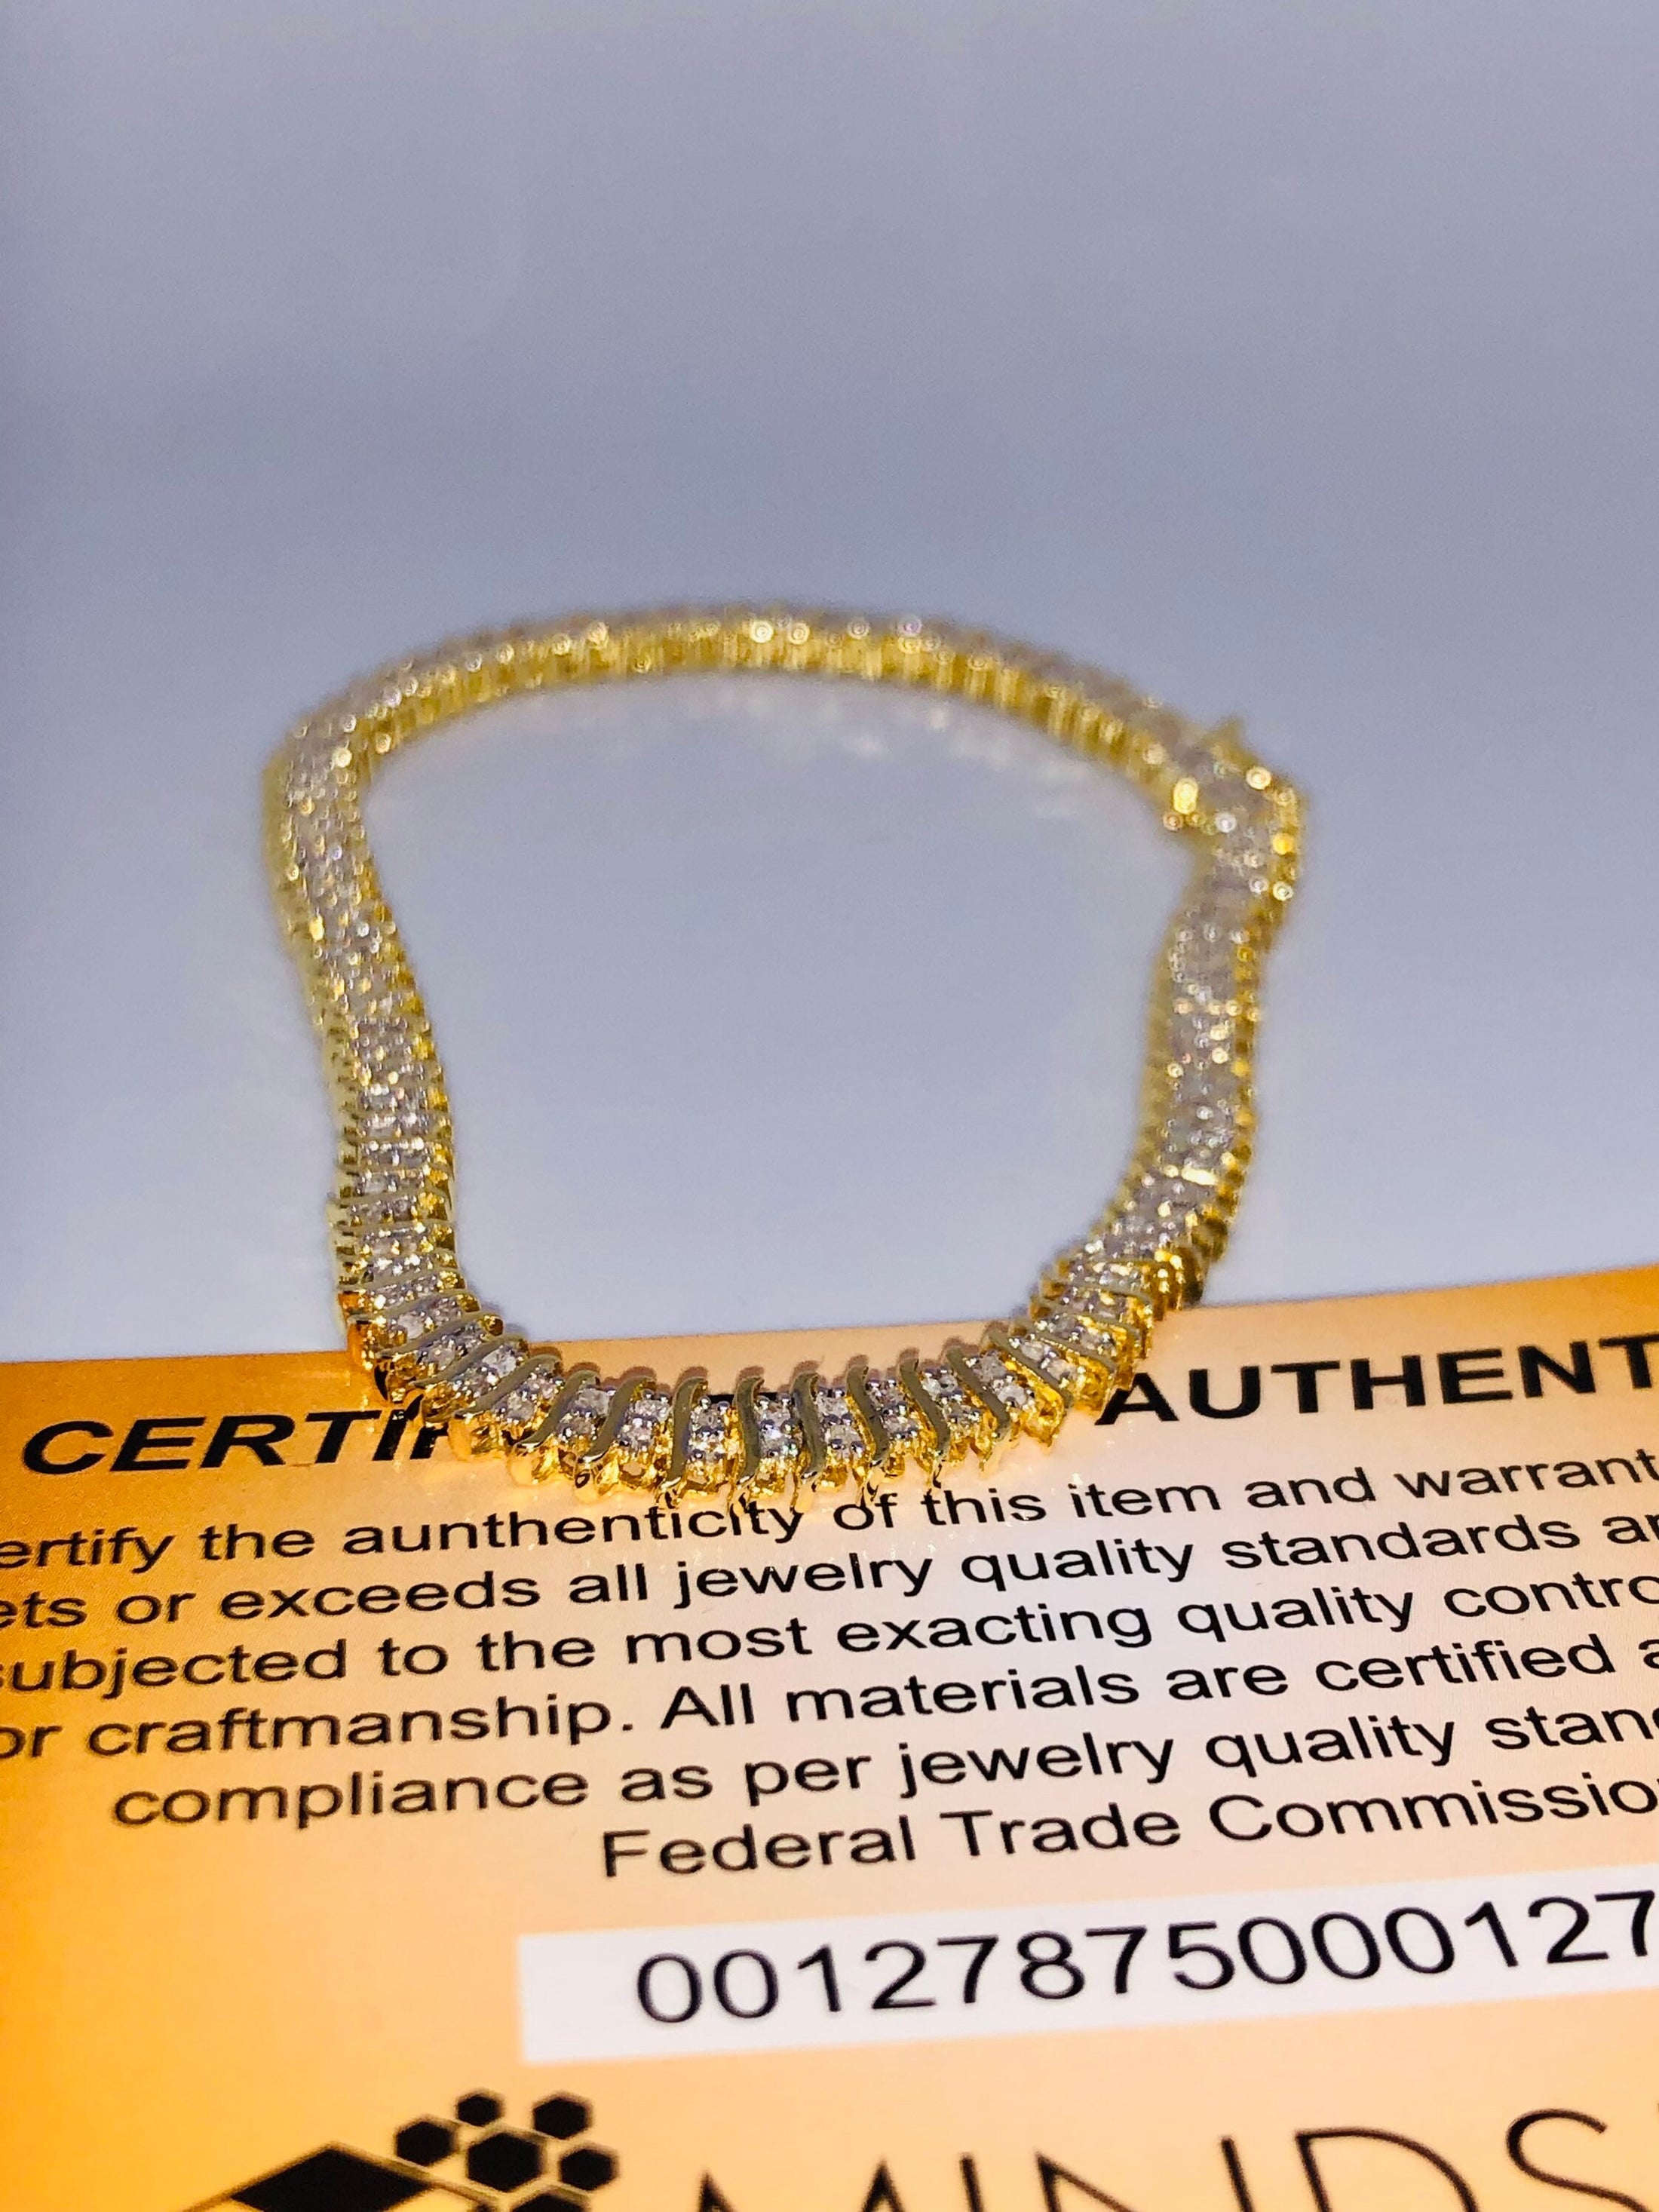 REAL Diamond Double row Tennis Bracelet Custom Made 1.25ct genuine natural diamonds not CZ not fake! Authenticity card & gift wrap included!